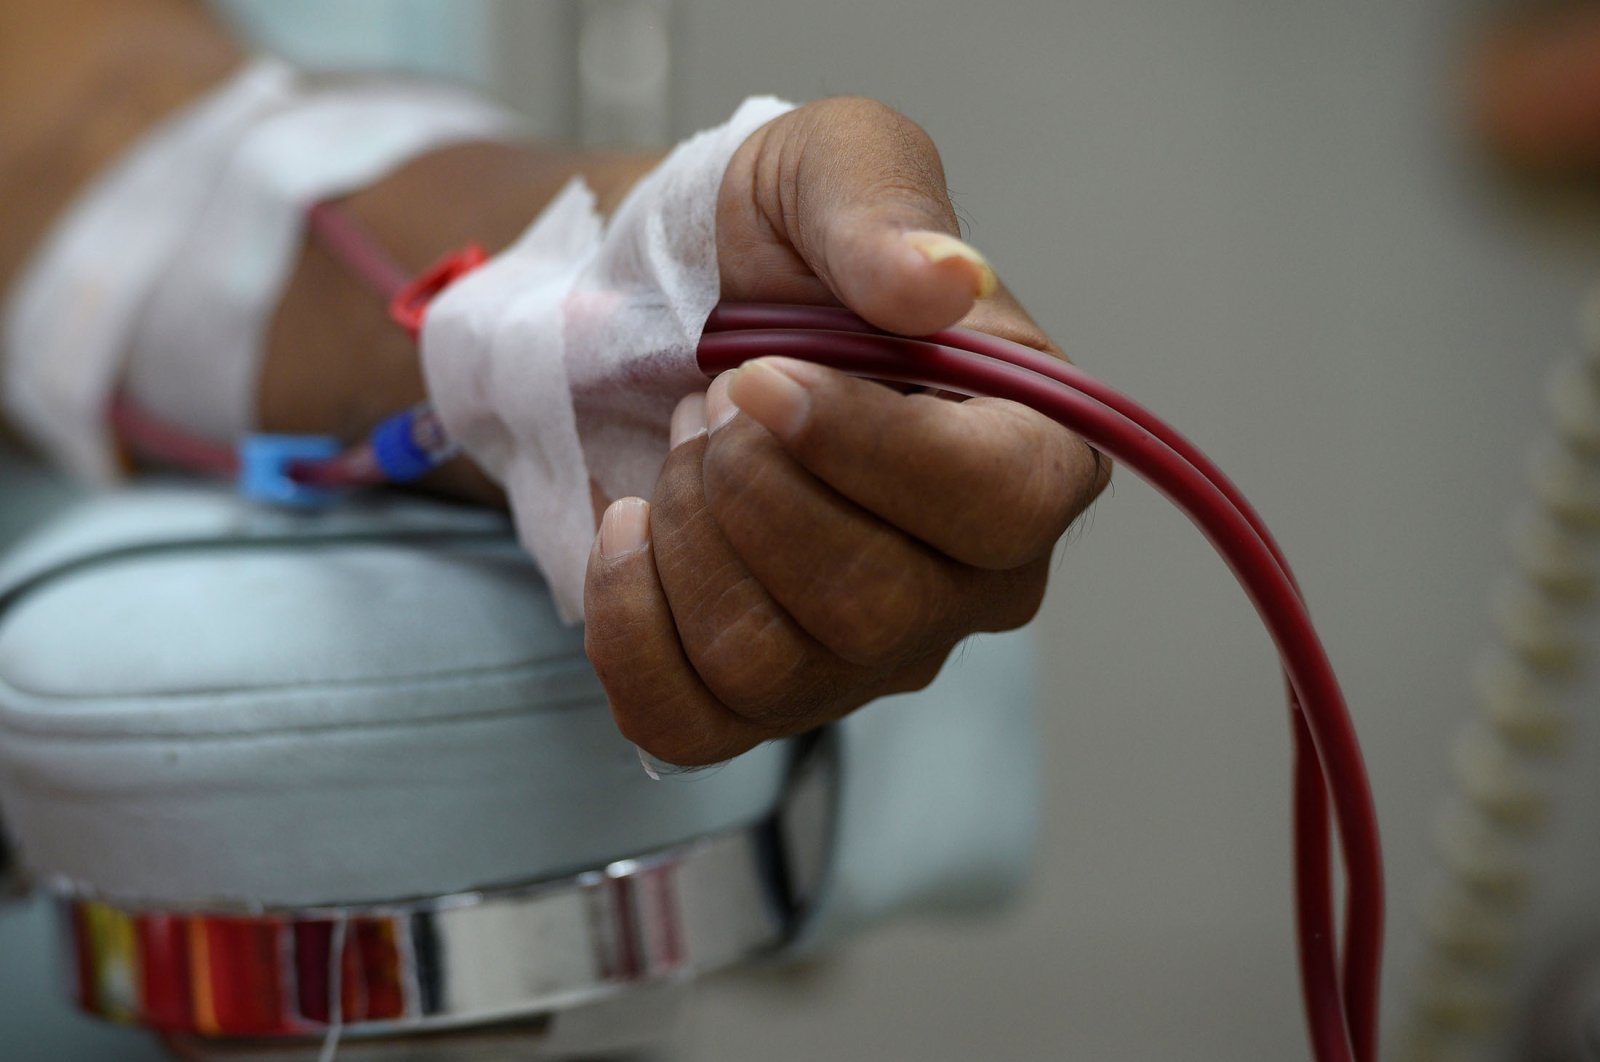 A patient undergoes dialysis treatment at a dialysis center, in Guayaquil, Ecuador, April 18, 2020. (Reuters Photo)